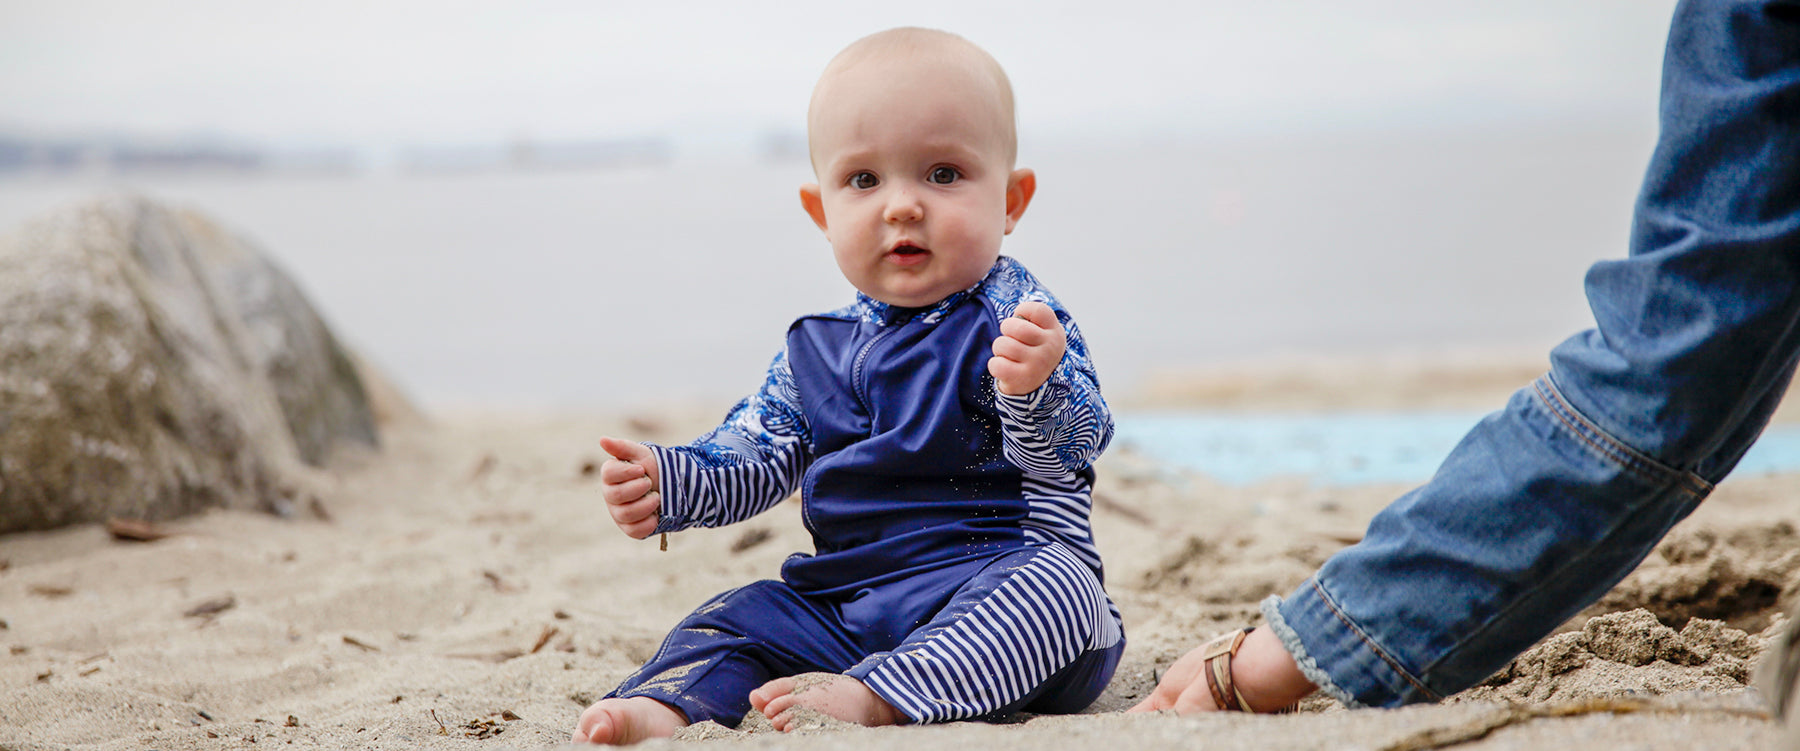 Little baby wearing Stonz UV protection sunsuit at the beach